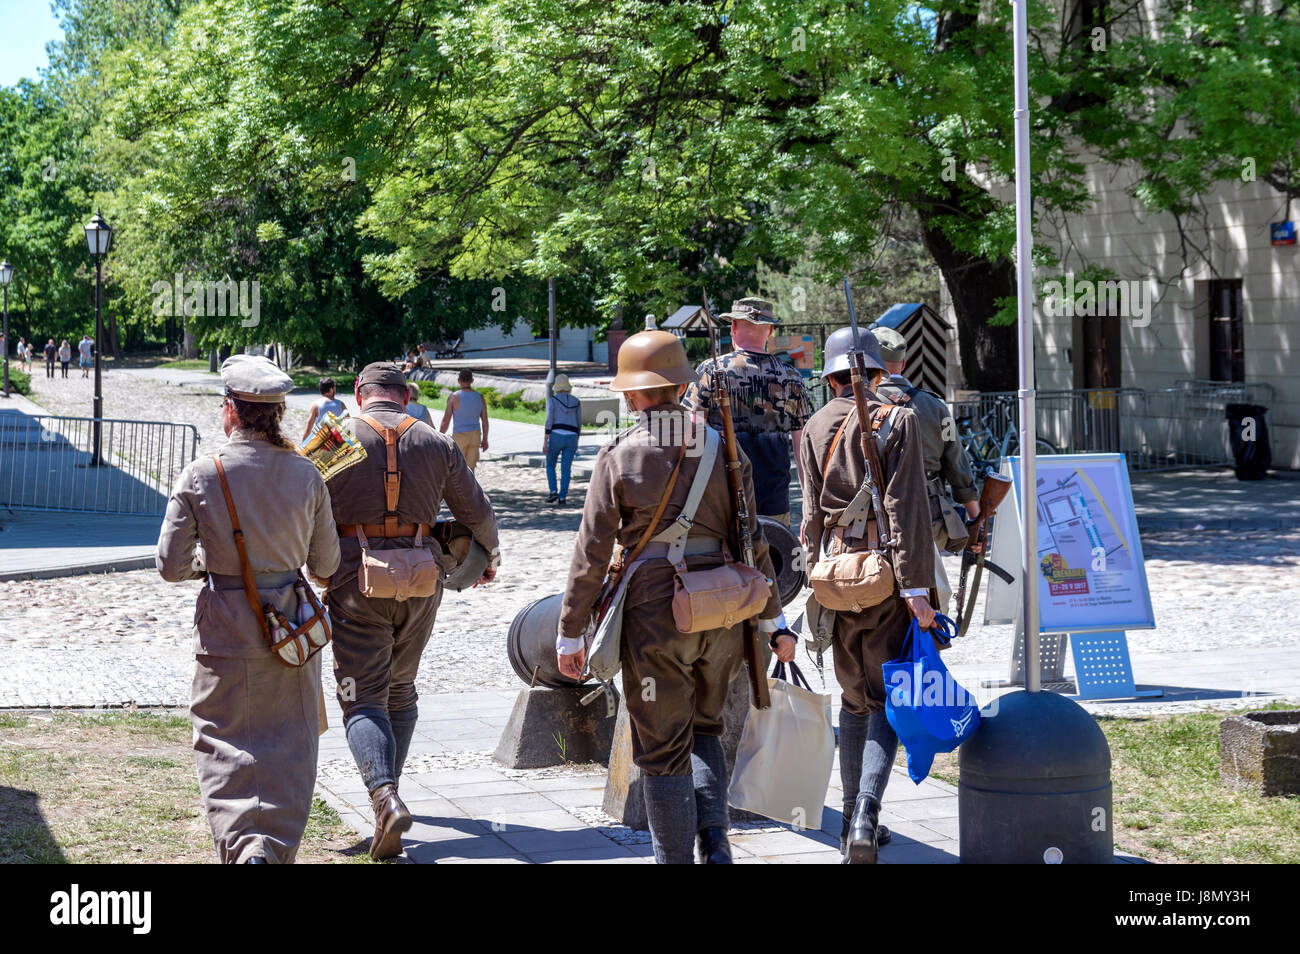 Warsaw, Poland. 28th May, 2017. Military re-enactors in German uniforms participate in an annual historical re-enactment show called the Warsaw Strategic Game Convention-Grenadier 2017 in the old Warsaw citadel. Credit: dario photography/Alamy Live News Stock Photo